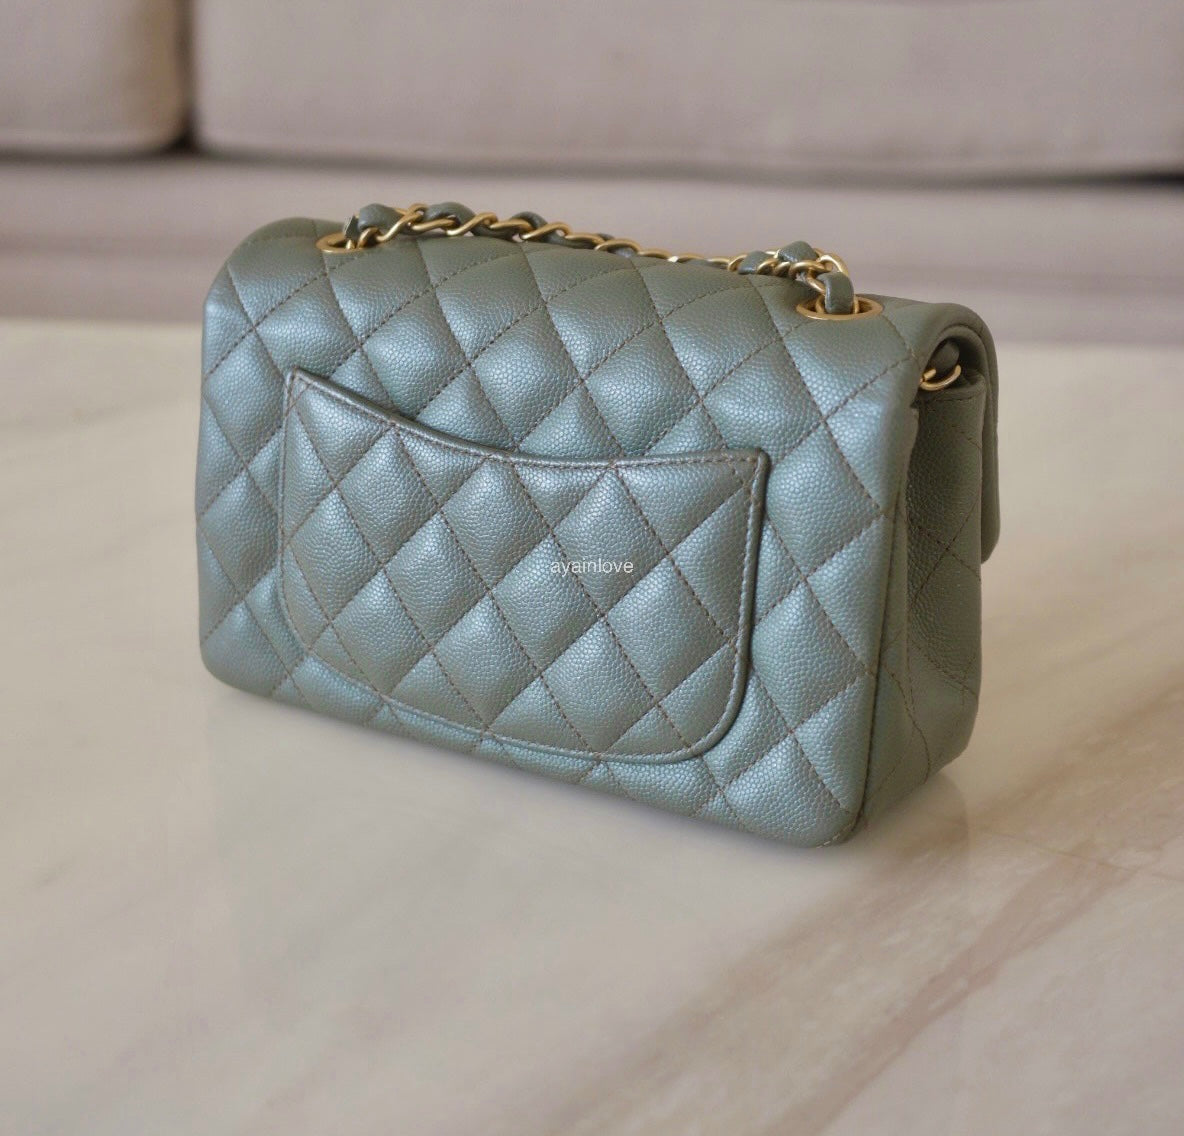 Chanel 18S Iridescent PEARLY Navy BLUE Classic MINI Square CAVIAR Leather  GHW Unboxing #luxurypl38 